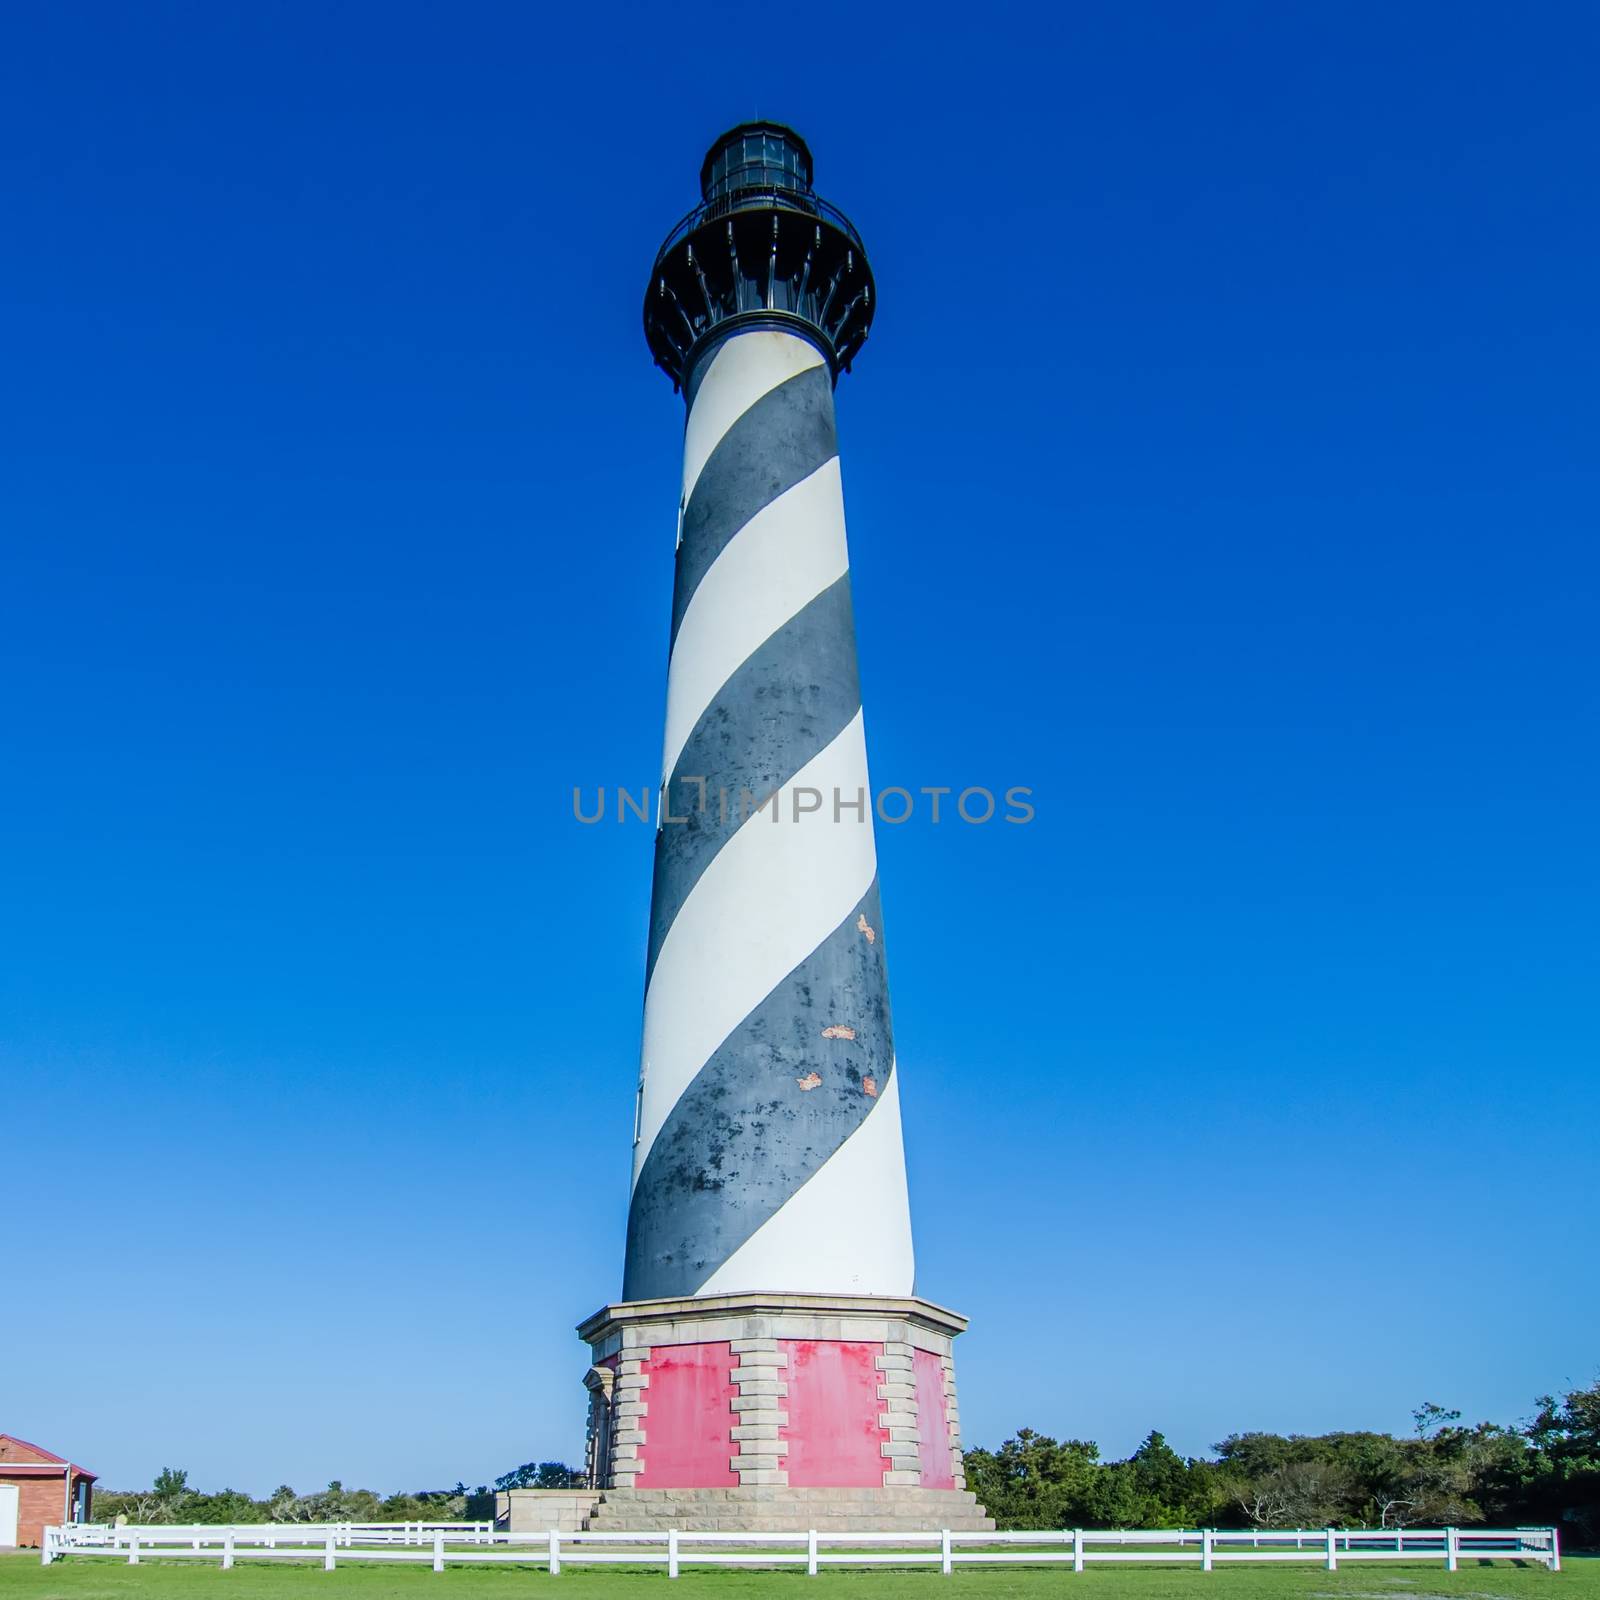 Diagonal black and white stripes mark the Cape Hatteras lighthouse at its new location near the town of Buxton on the Outer Banks of North Carolina